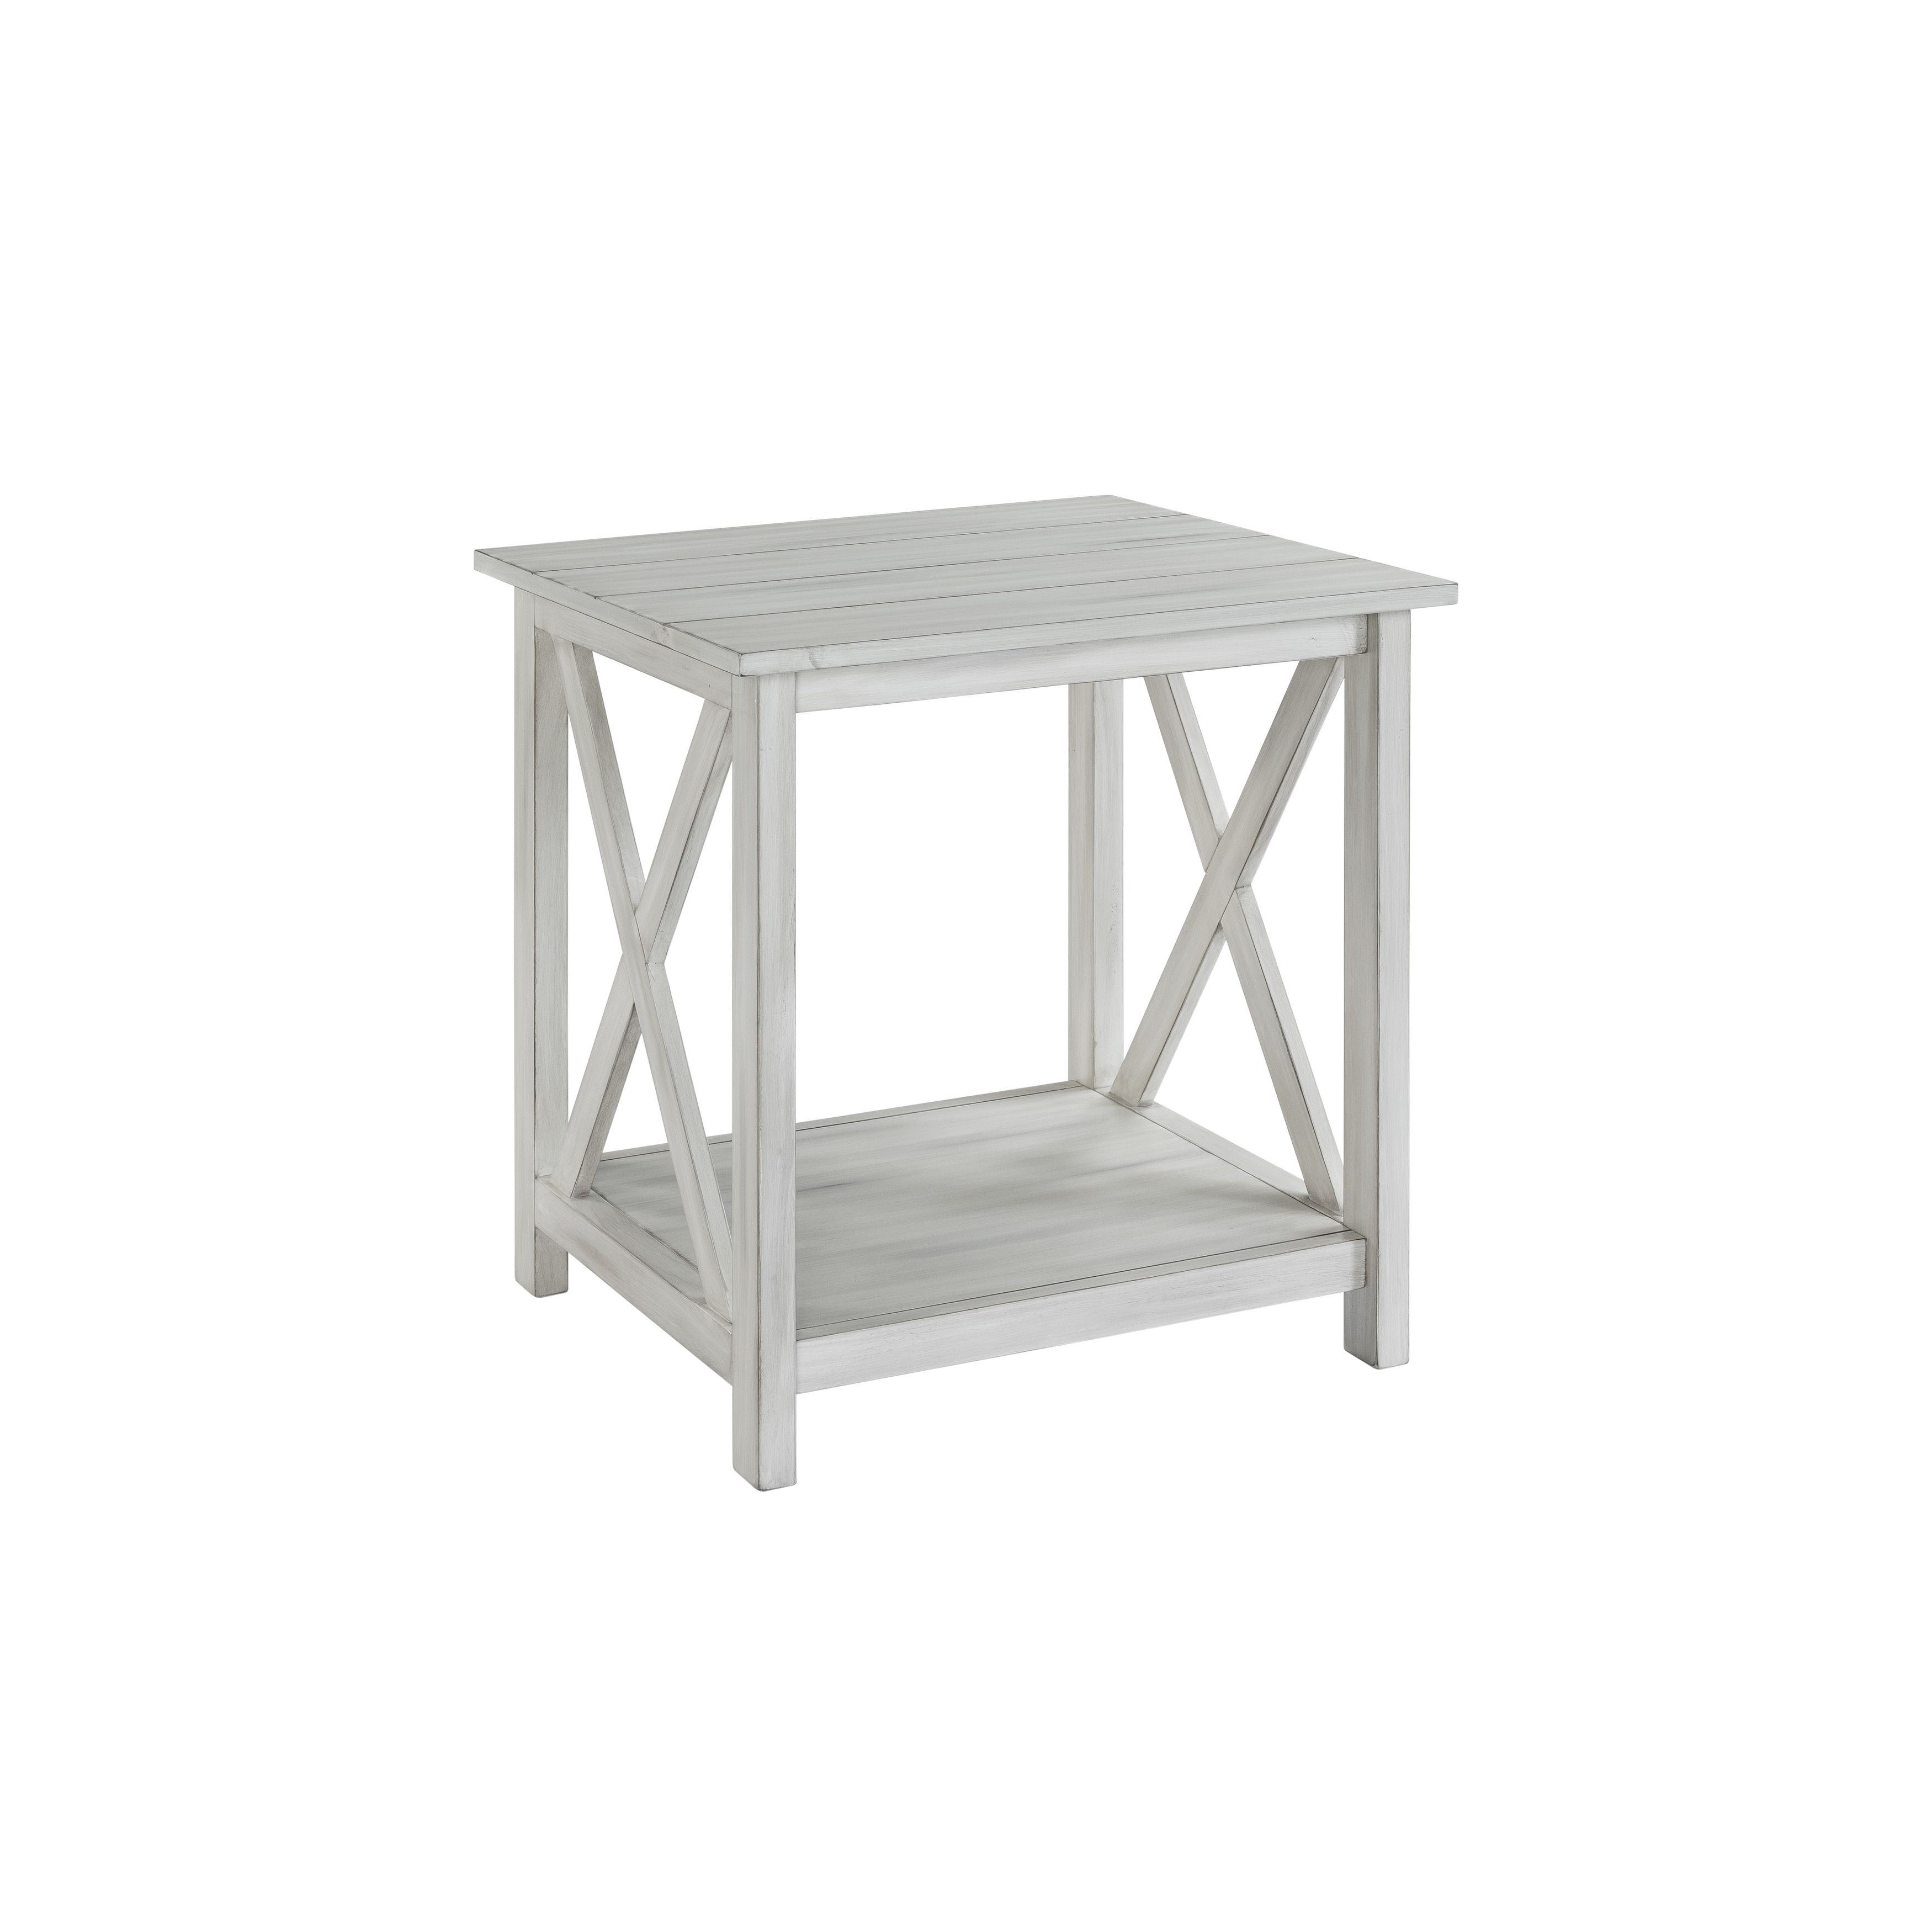 jamestown distressed white wood end table free tables light brown couch decor square pallet coffee ashley furniture bar sets mirrored entryway wallpaper for bathrooms laura small